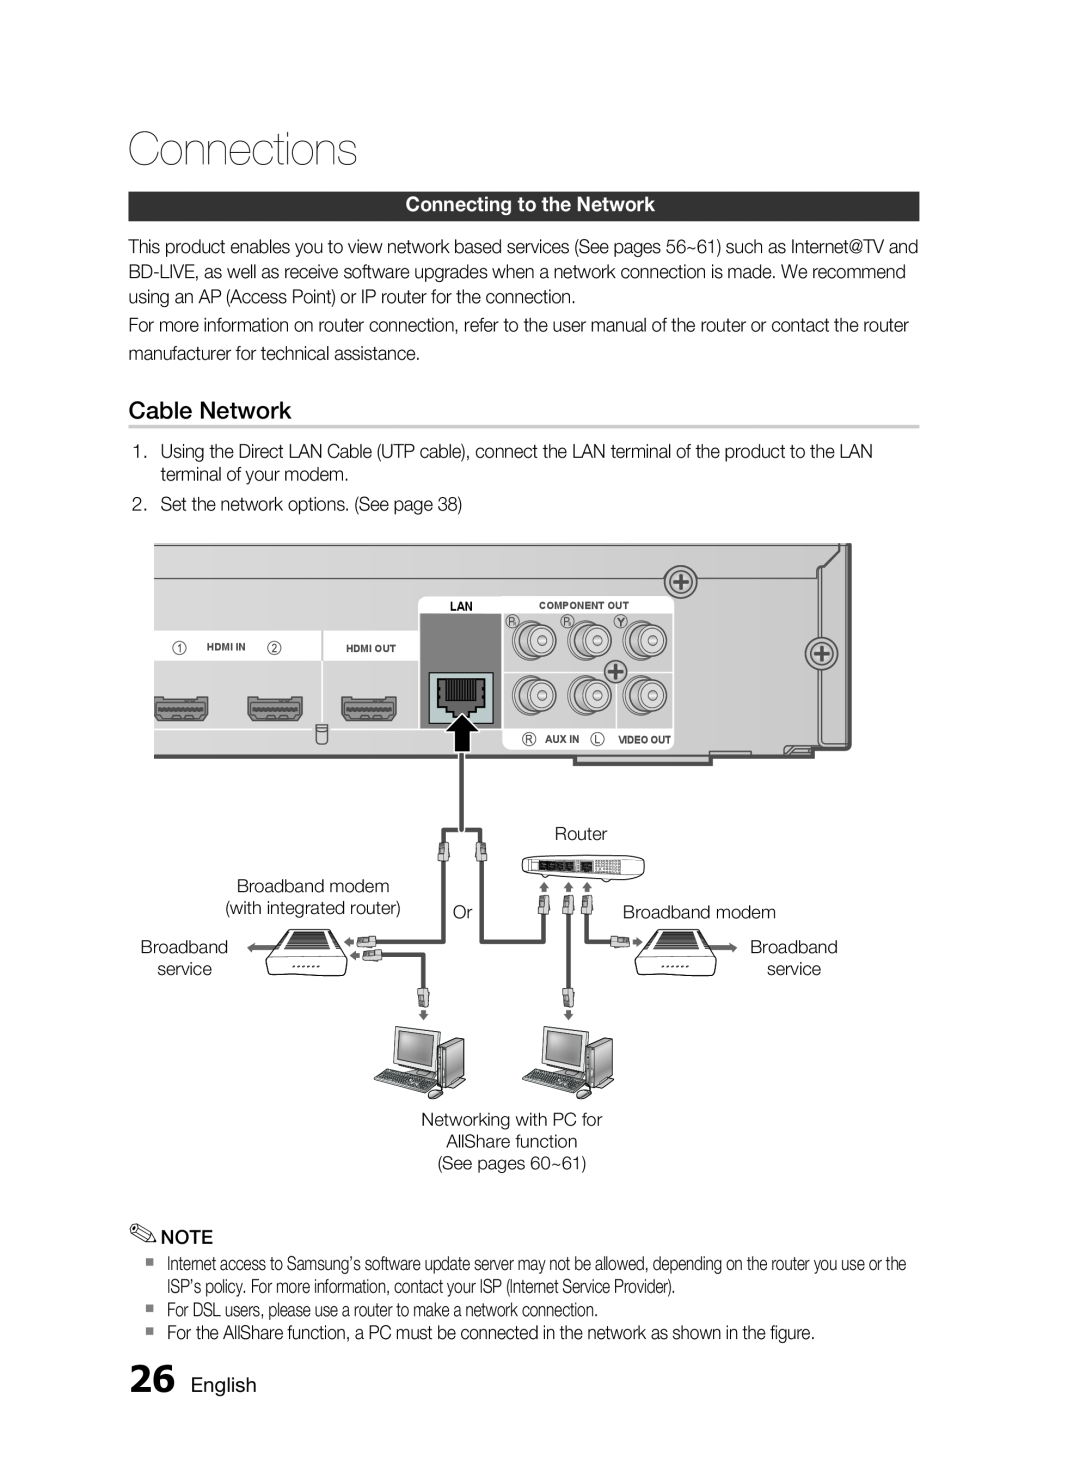 Samsung AH68-02255S, HT-C6530 user manual Cable Network, Connecting to the Network, English, Connections 